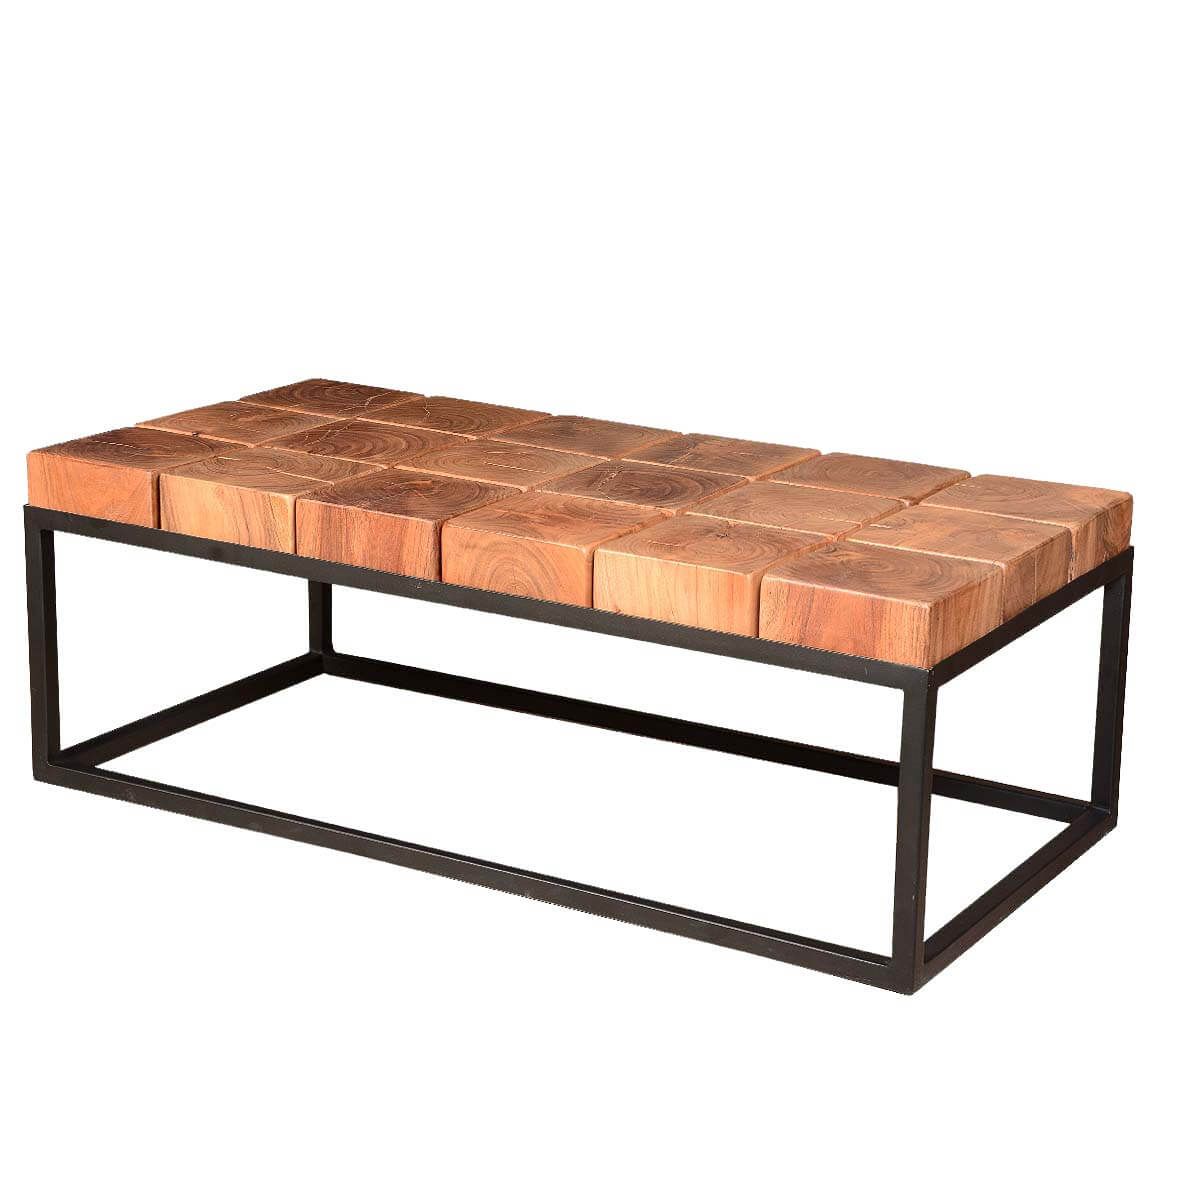 Solid Acacia Wood Block Contemporary Iron Base Rustic Coffee Table Inside Acacia Wood Coffee Tables (View 14 of 20)